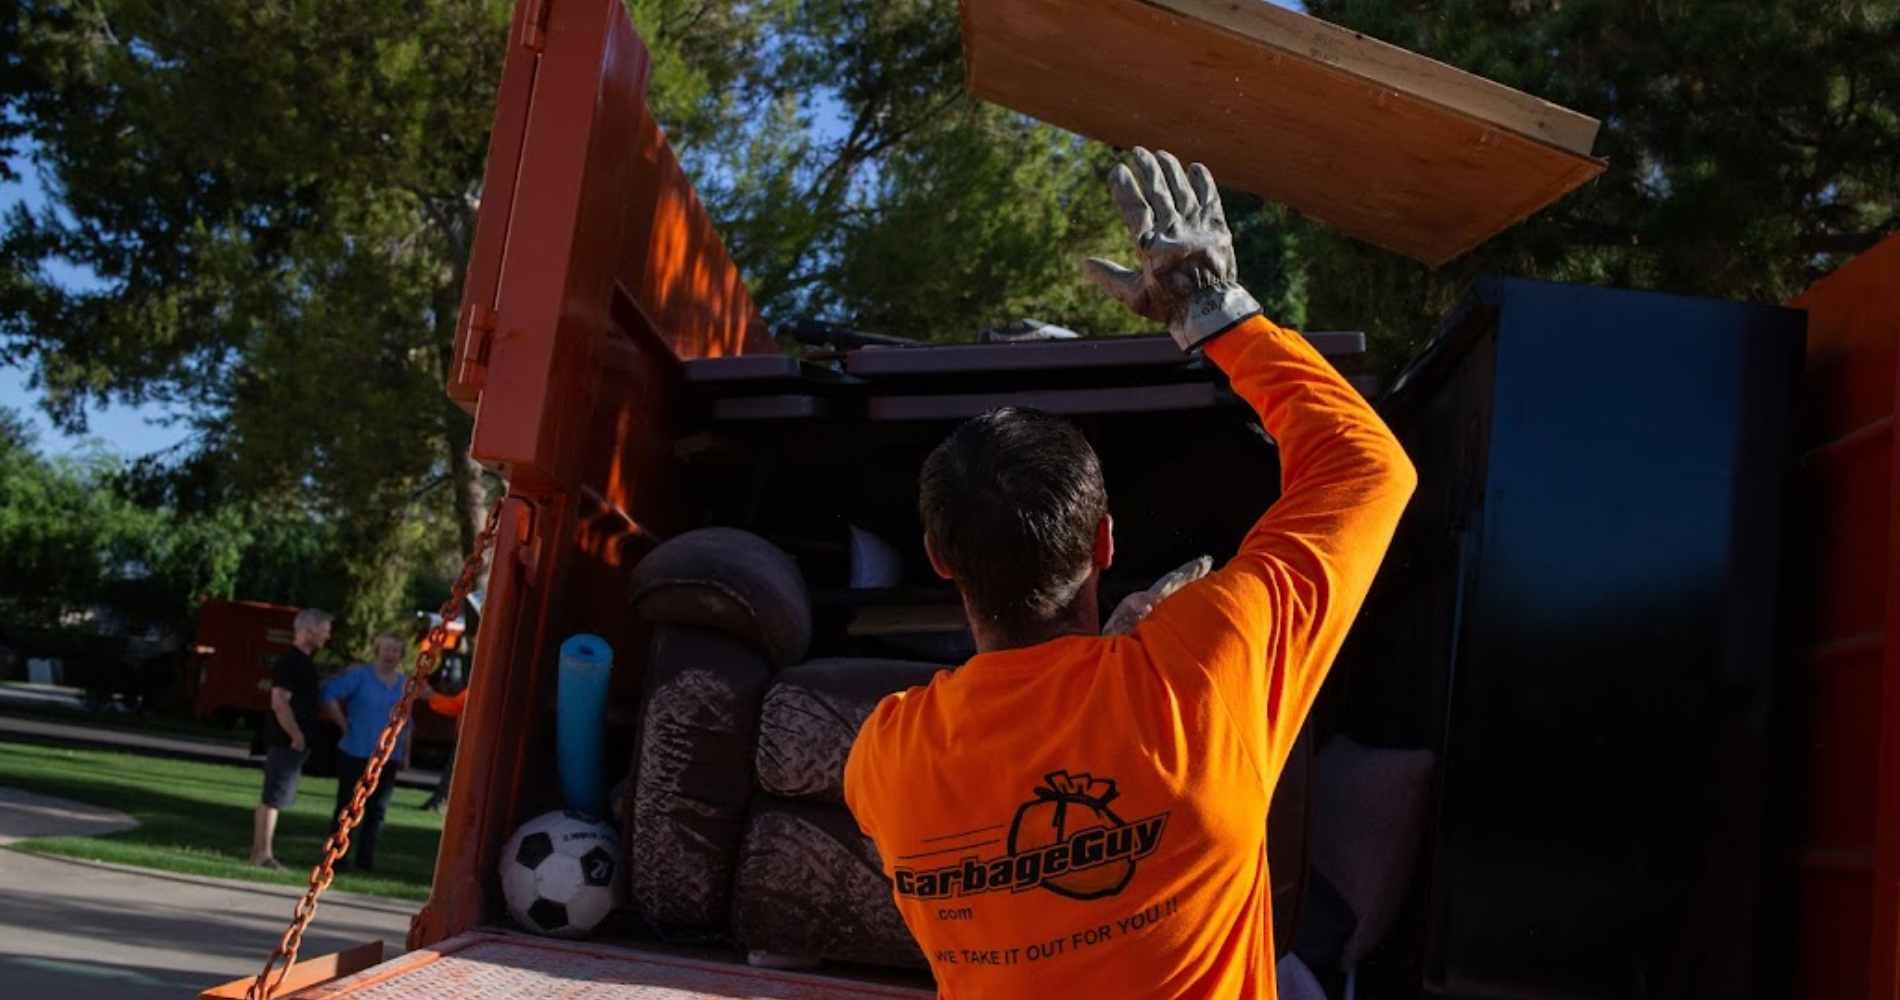 #1 for Eviction Cleanout in Florence, AZ with Over 1200 5-Star Reviews!